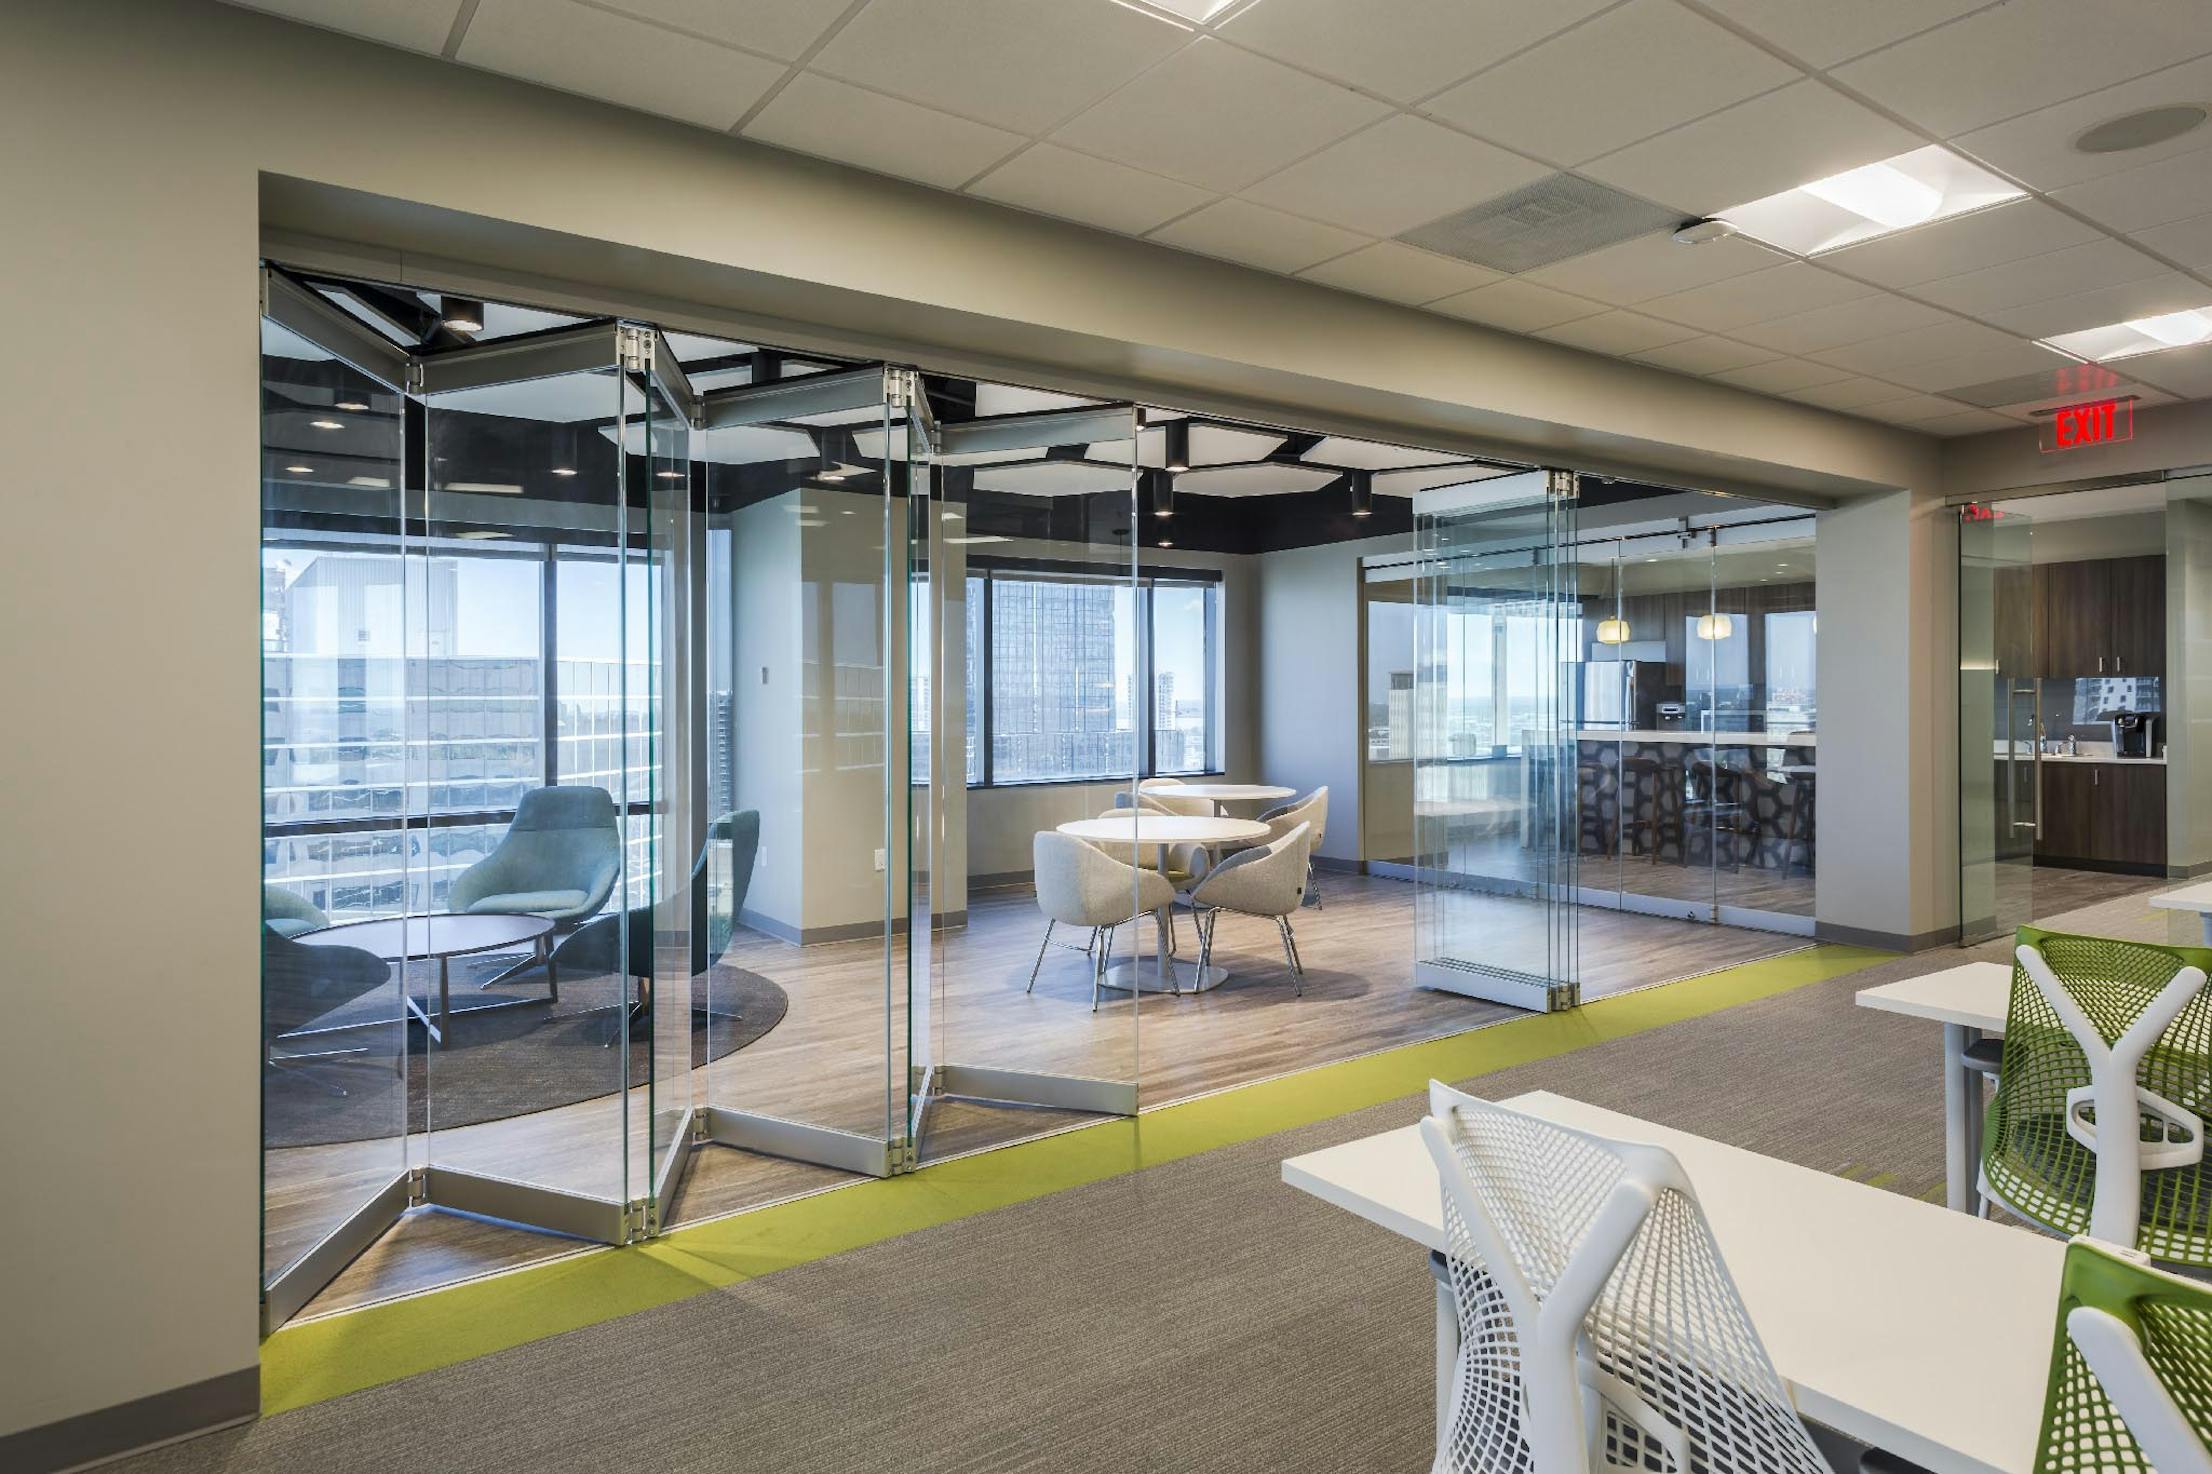 All glass walls in an office environment